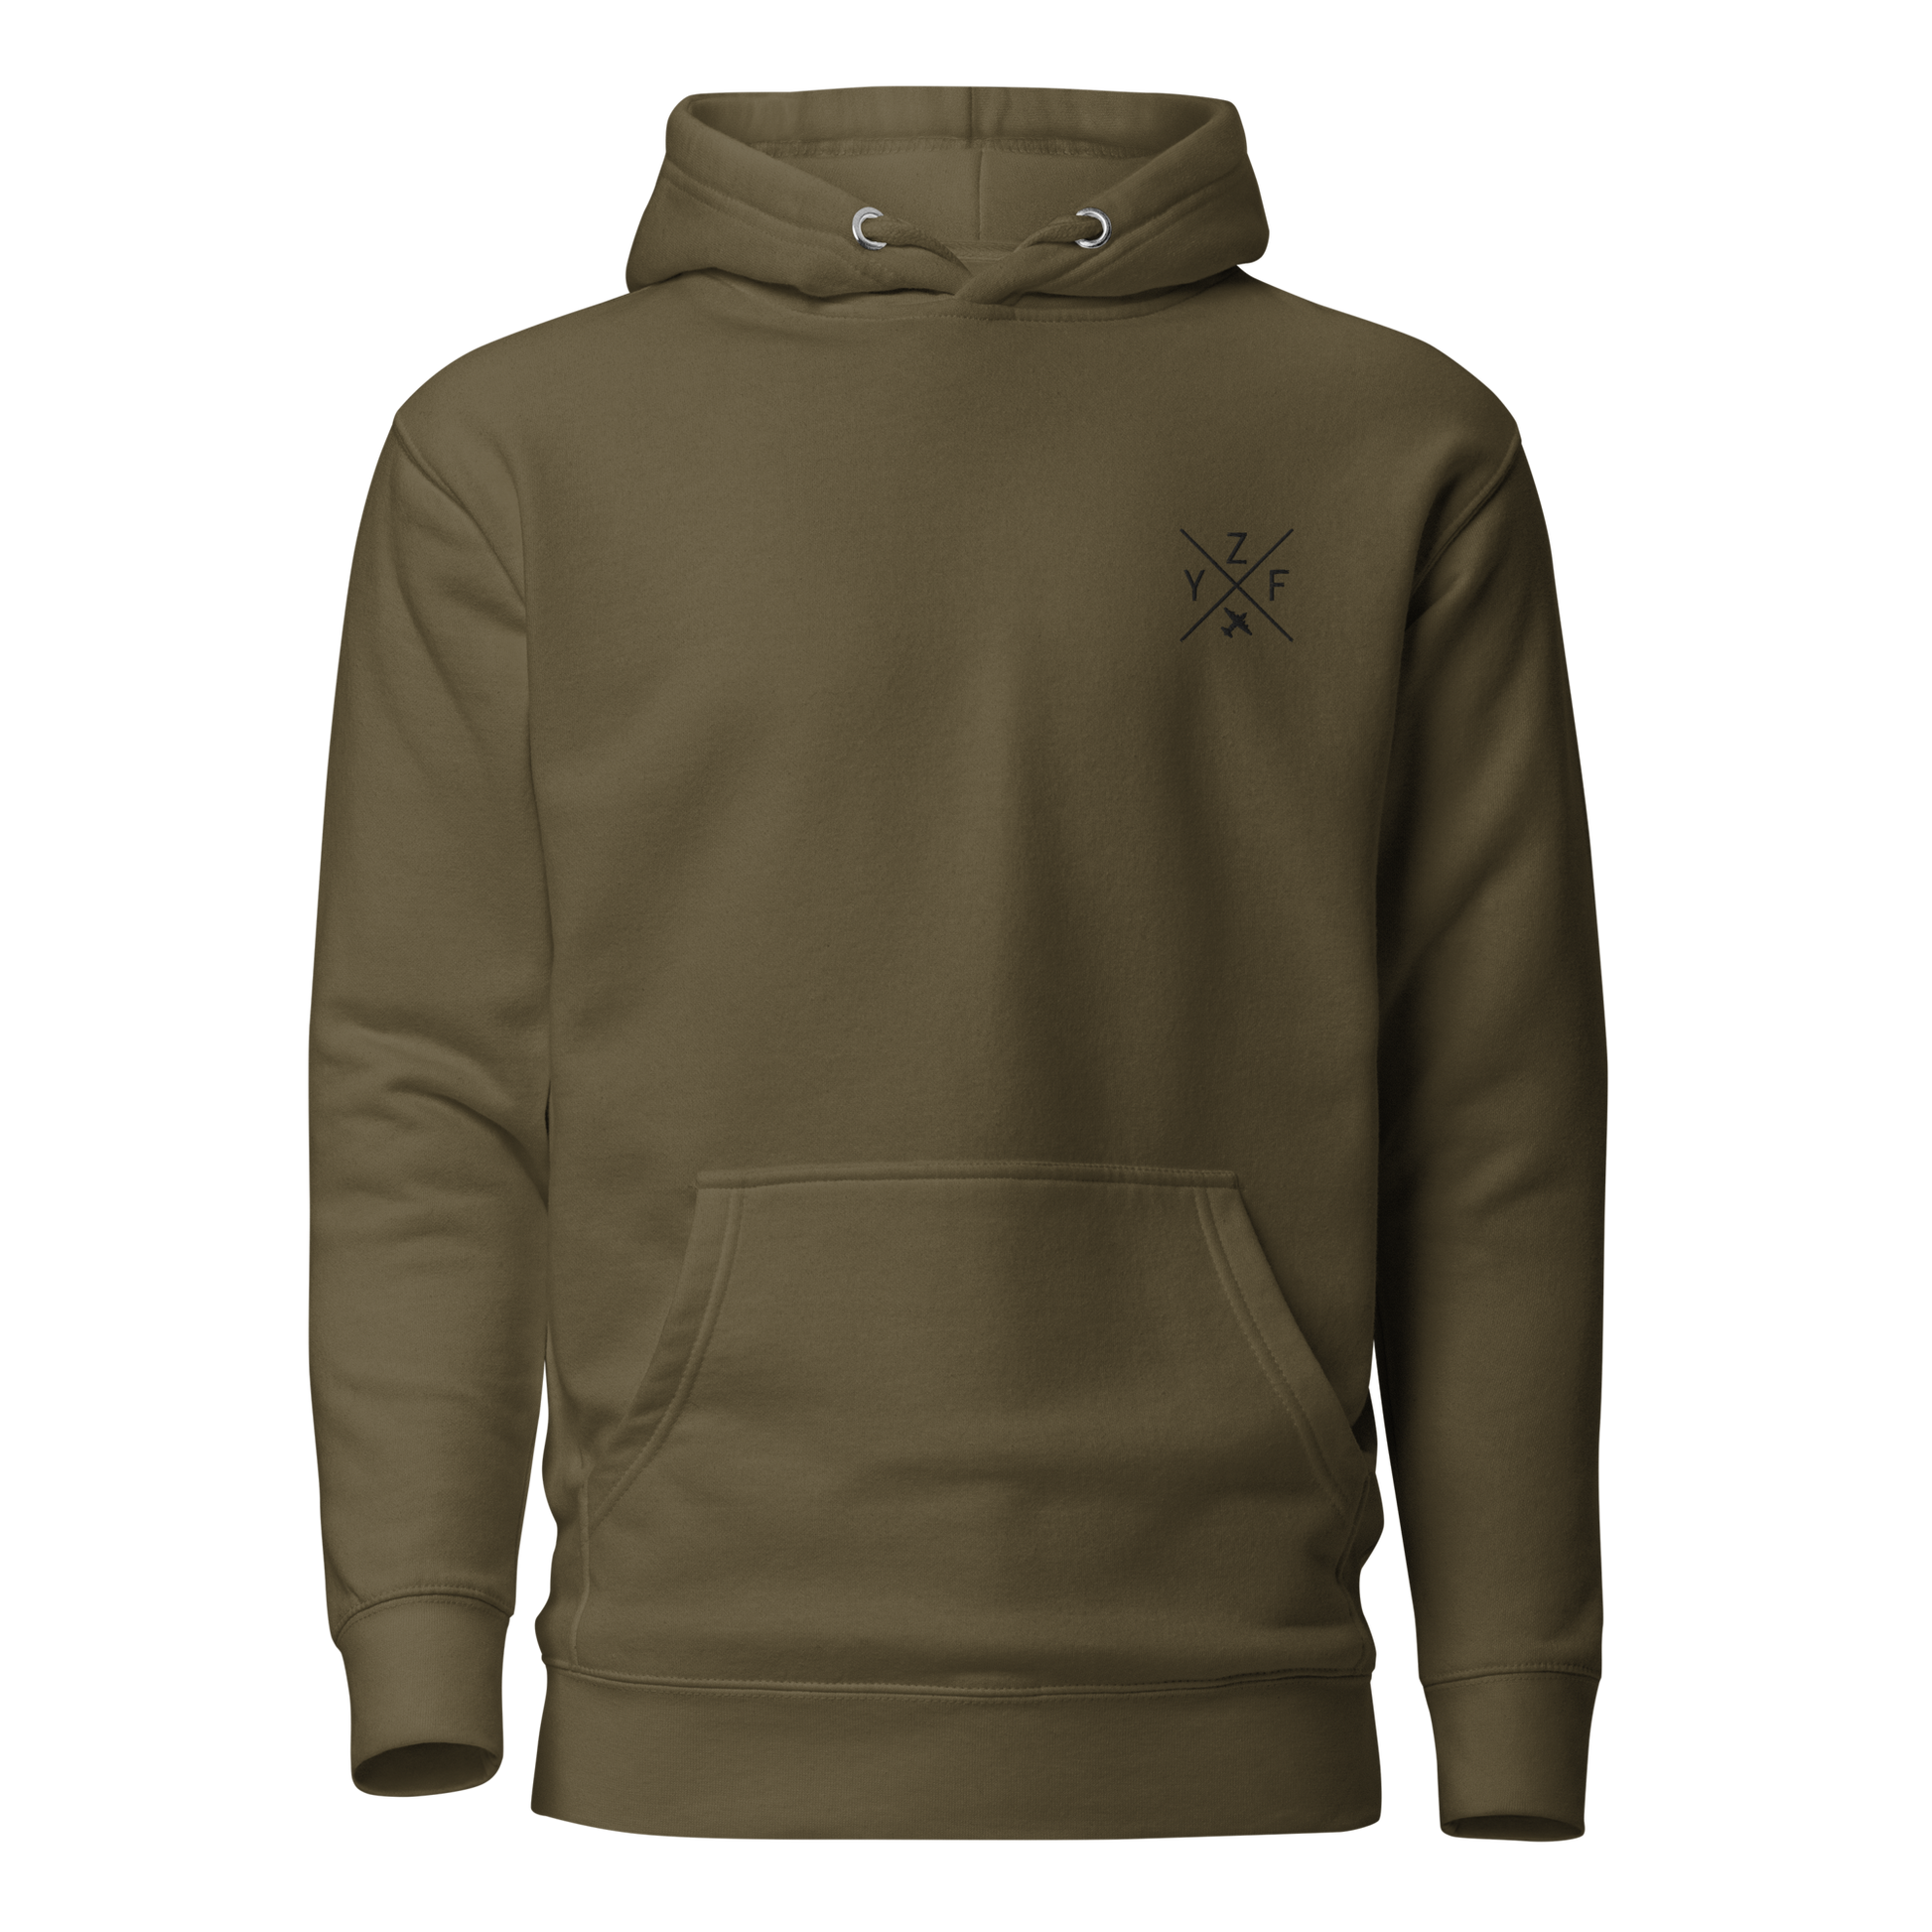 YHM Designs - YZF Yellowknife Premium Hoodie - Crossed-X Design with Airport Code and Vintage Propliner - Black Embroidery - Image 07